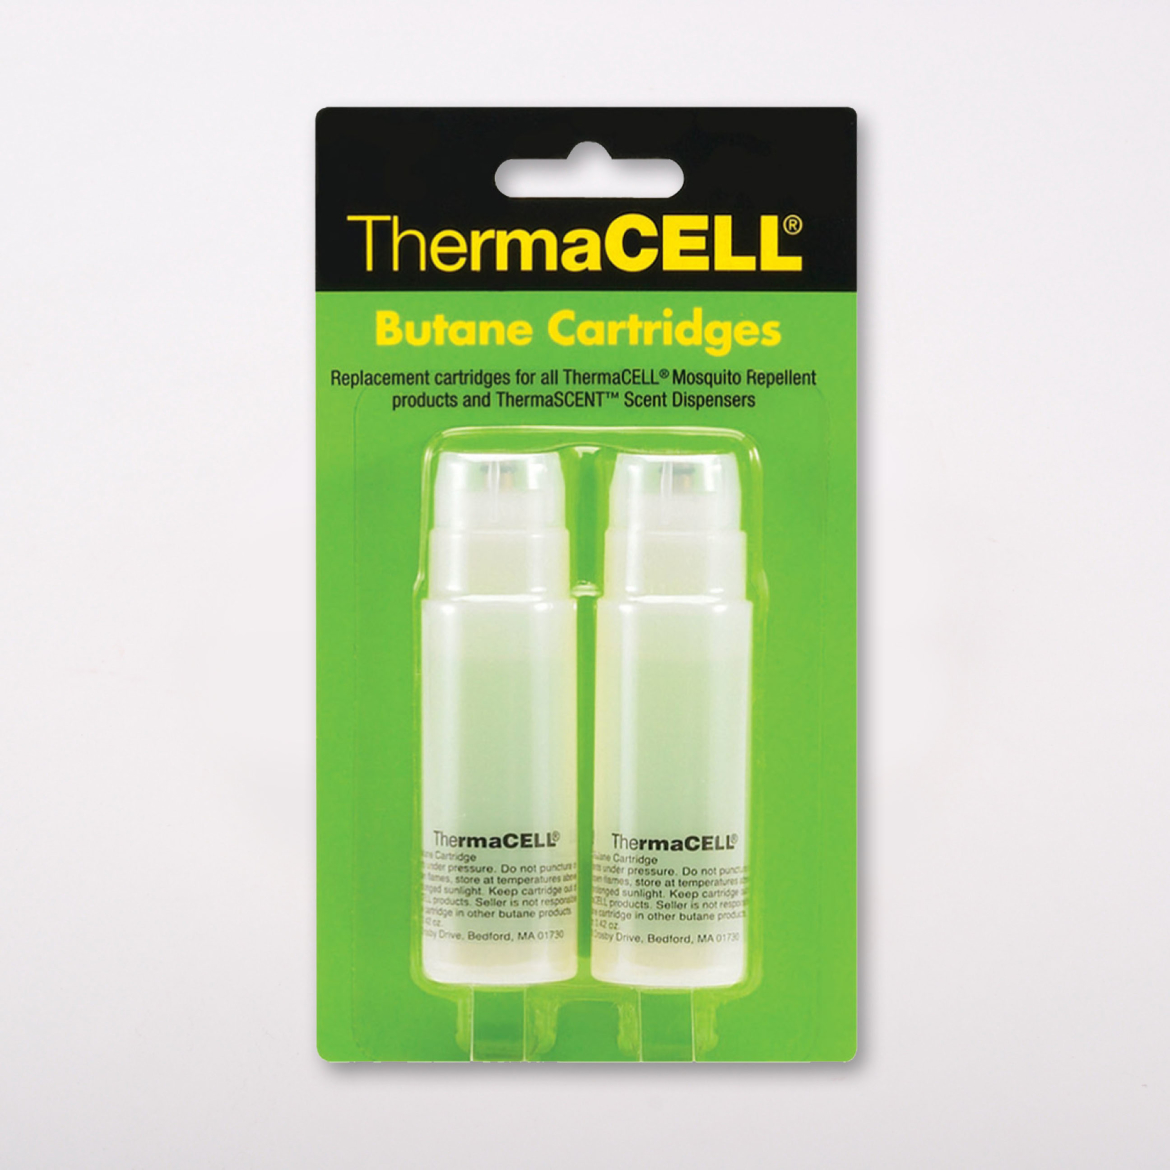 Thermacell C-2 butane gas refill 2 pcs